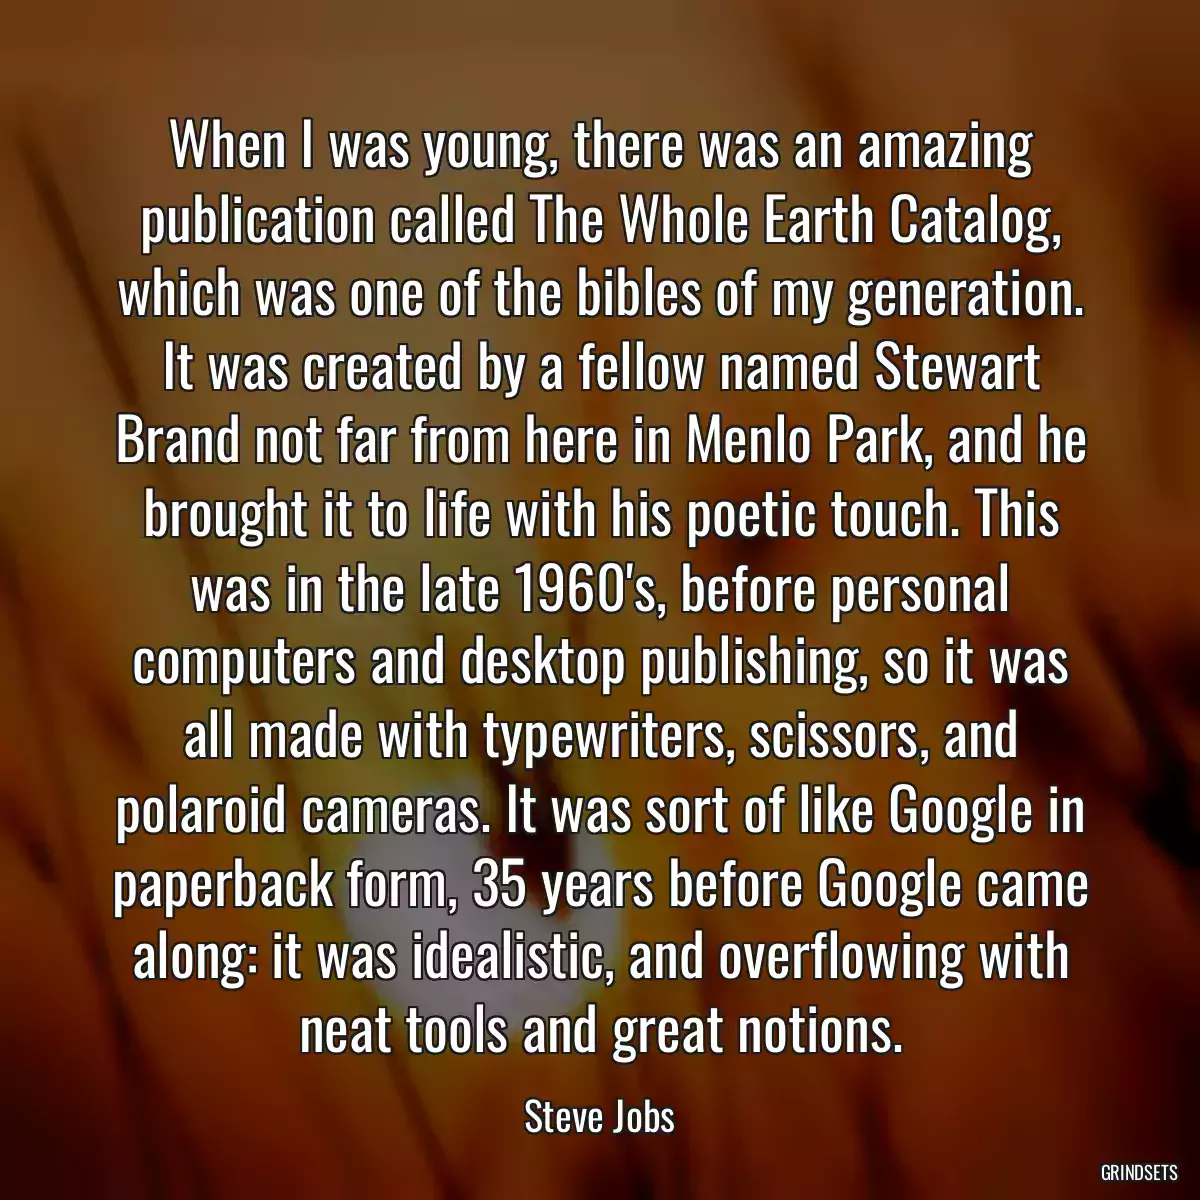 When I was young, there was an amazing publication called The Whole Earth Catalog, which was one of the bibles of my generation. It was created by a fellow named Stewart Brand not far from here in Menlo Park, and he brought it to life with his poetic touch. This was in the late 1960\'s, before personal computers and desktop publishing, so it was all made with typewriters, scissors, and polaroid cameras. It was sort of like Google in paperback form, 35 years before Google came along: it was idealistic, and overflowing with neat tools and great notions.